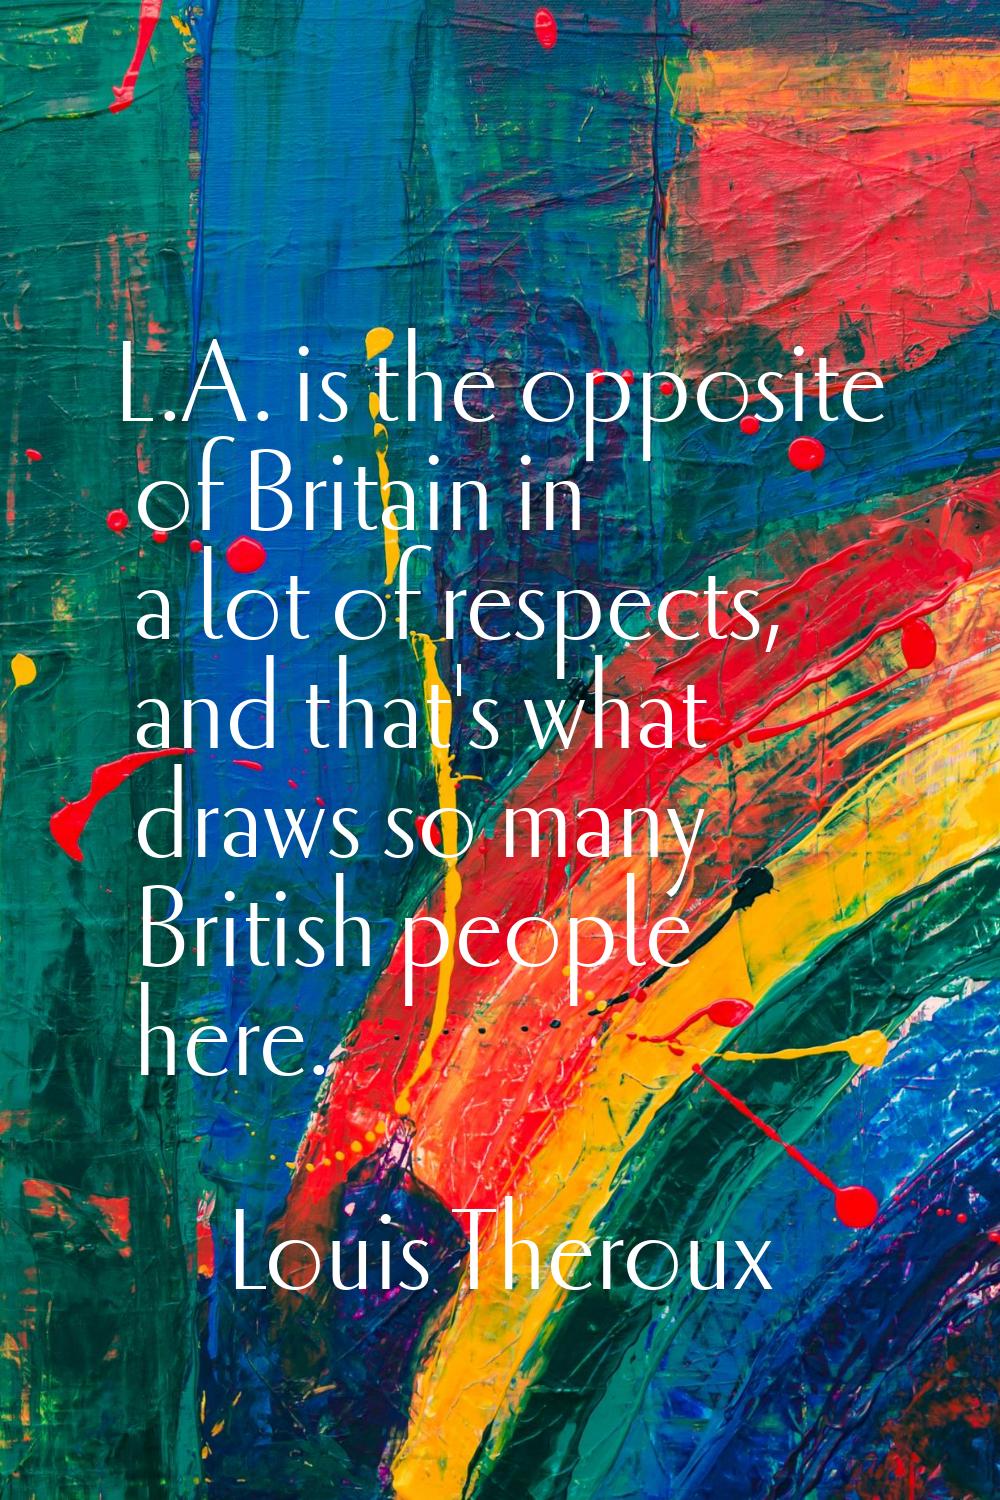 L.A. is the opposite of Britain in a lot of respects, and that's what draws so many British people 